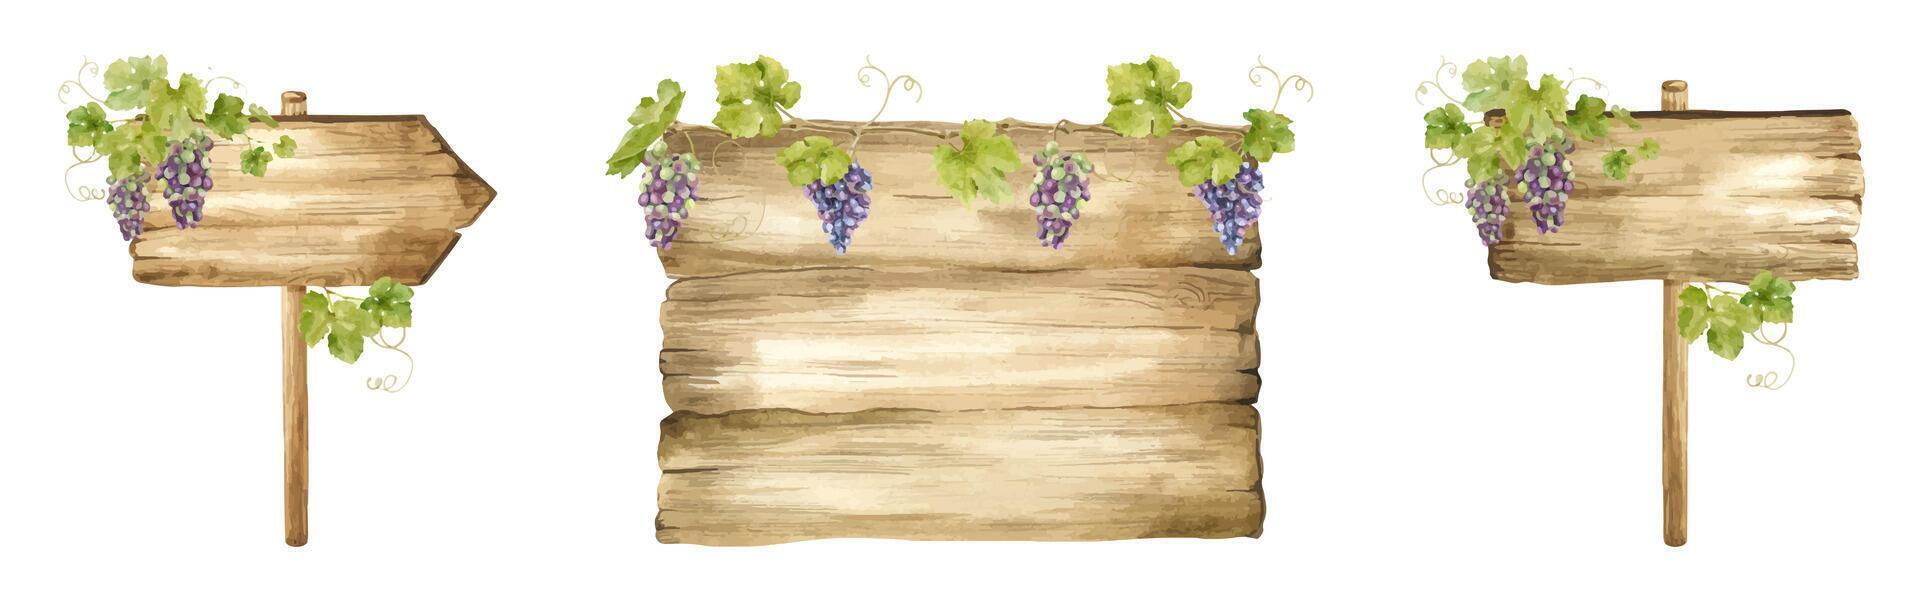 Set of Wooden signboards for grape plantations, vineyards. Wood boards with bunches of grapes, leaves.Signboard with grapevine. Isolated watercolor illustrations For postcards, marketing, invitations. vector